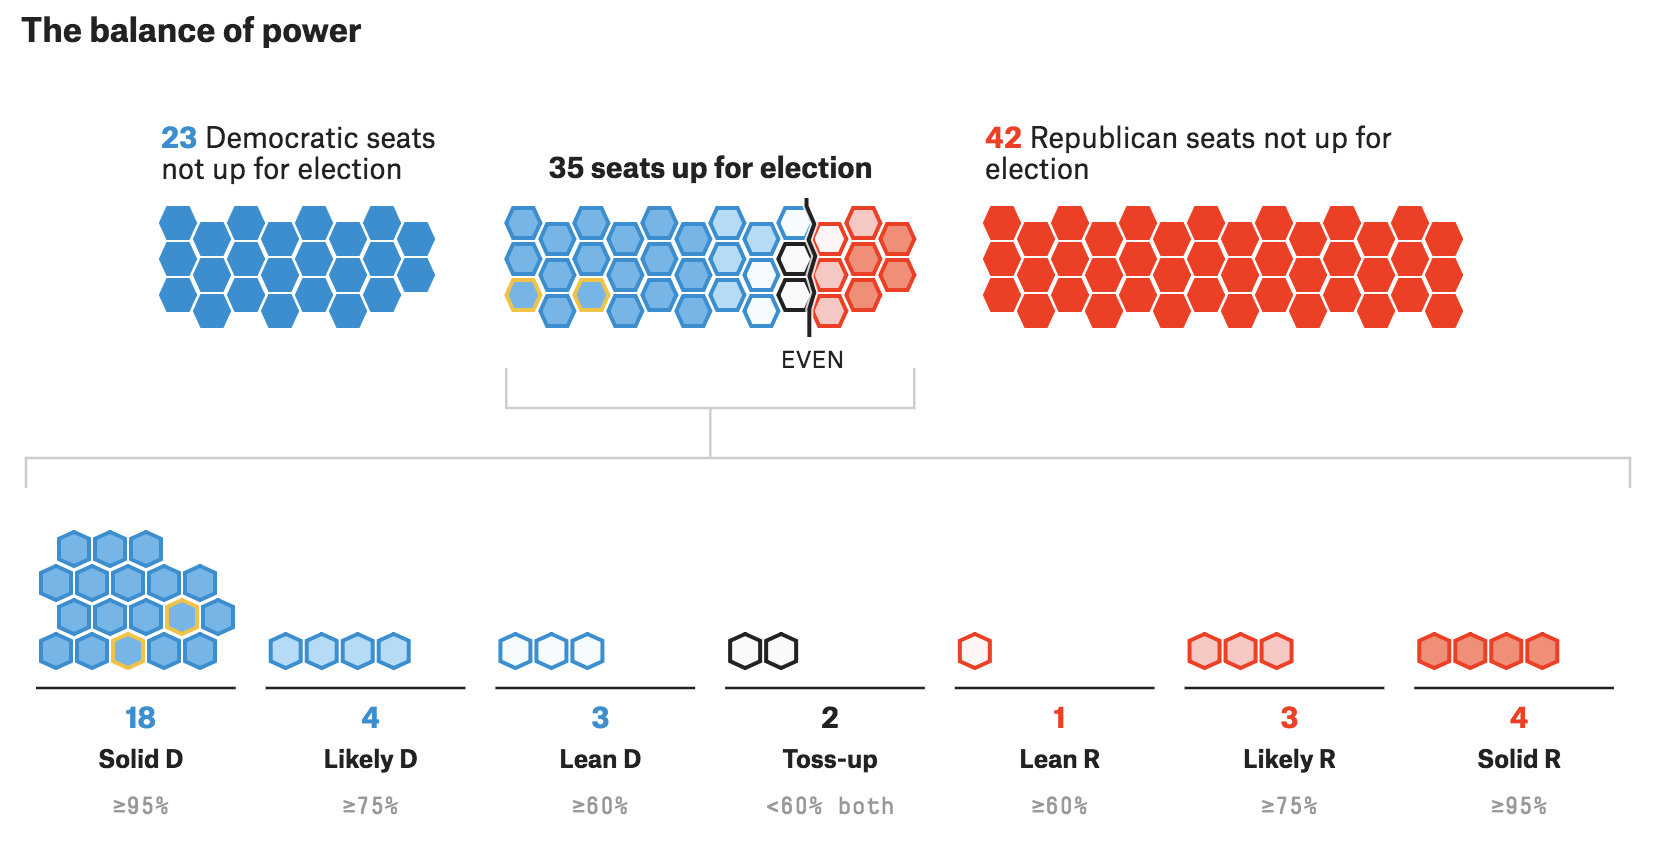 The Senate Forecast from FiveThirtyEight where the Senate breakdown is shown with the probability of Republicans or Democrats winning each seat.